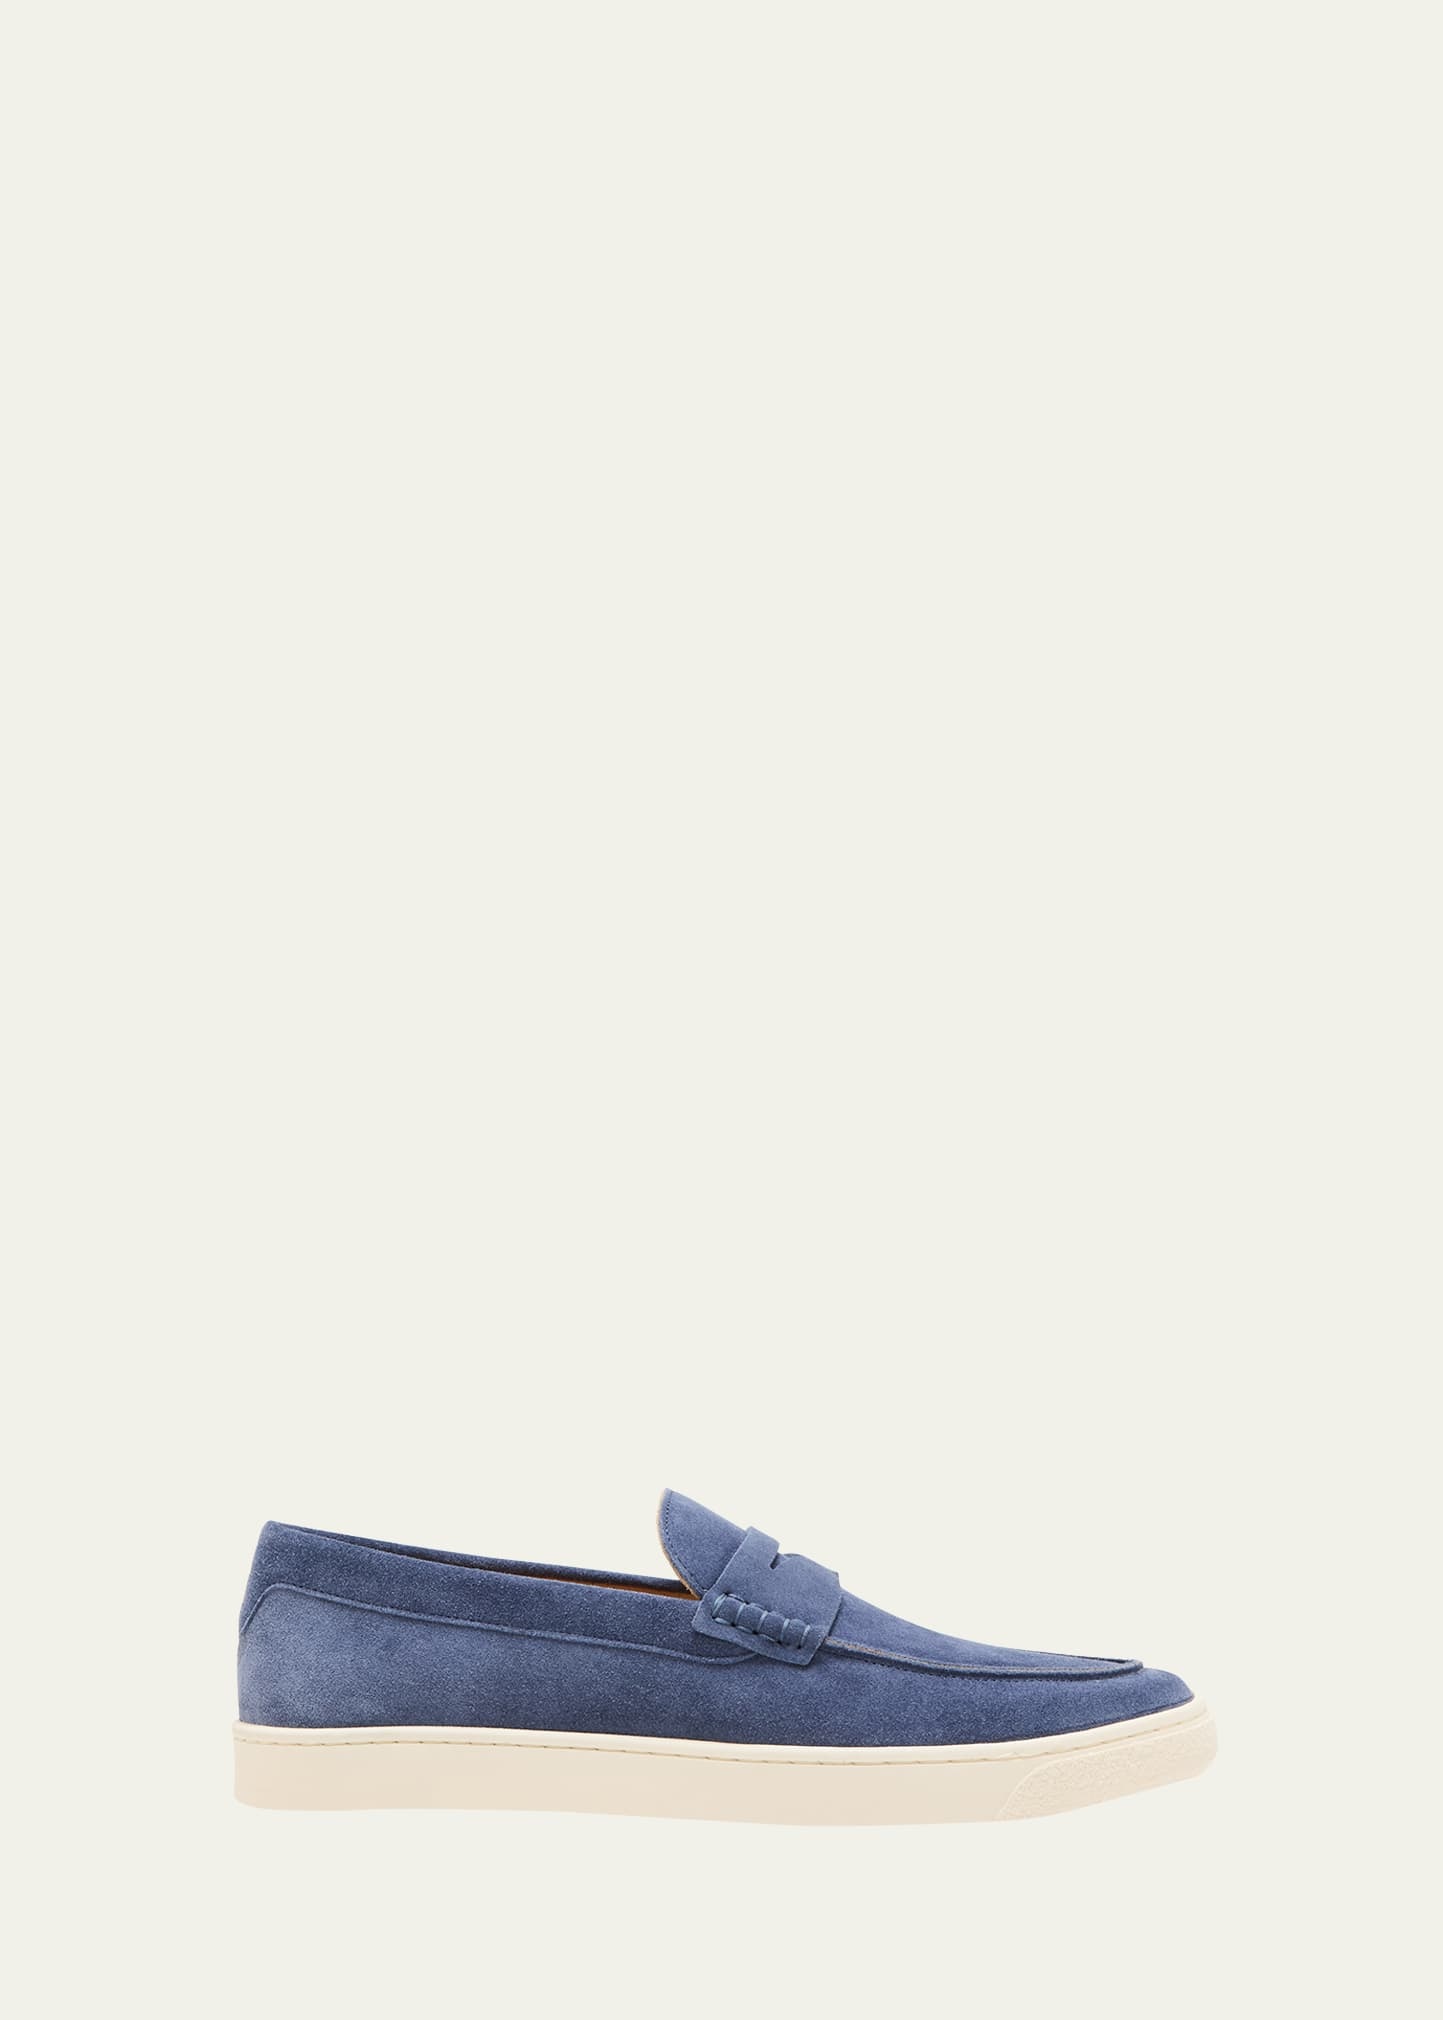 Men's Suede Moccasin Penny Loafers - 1